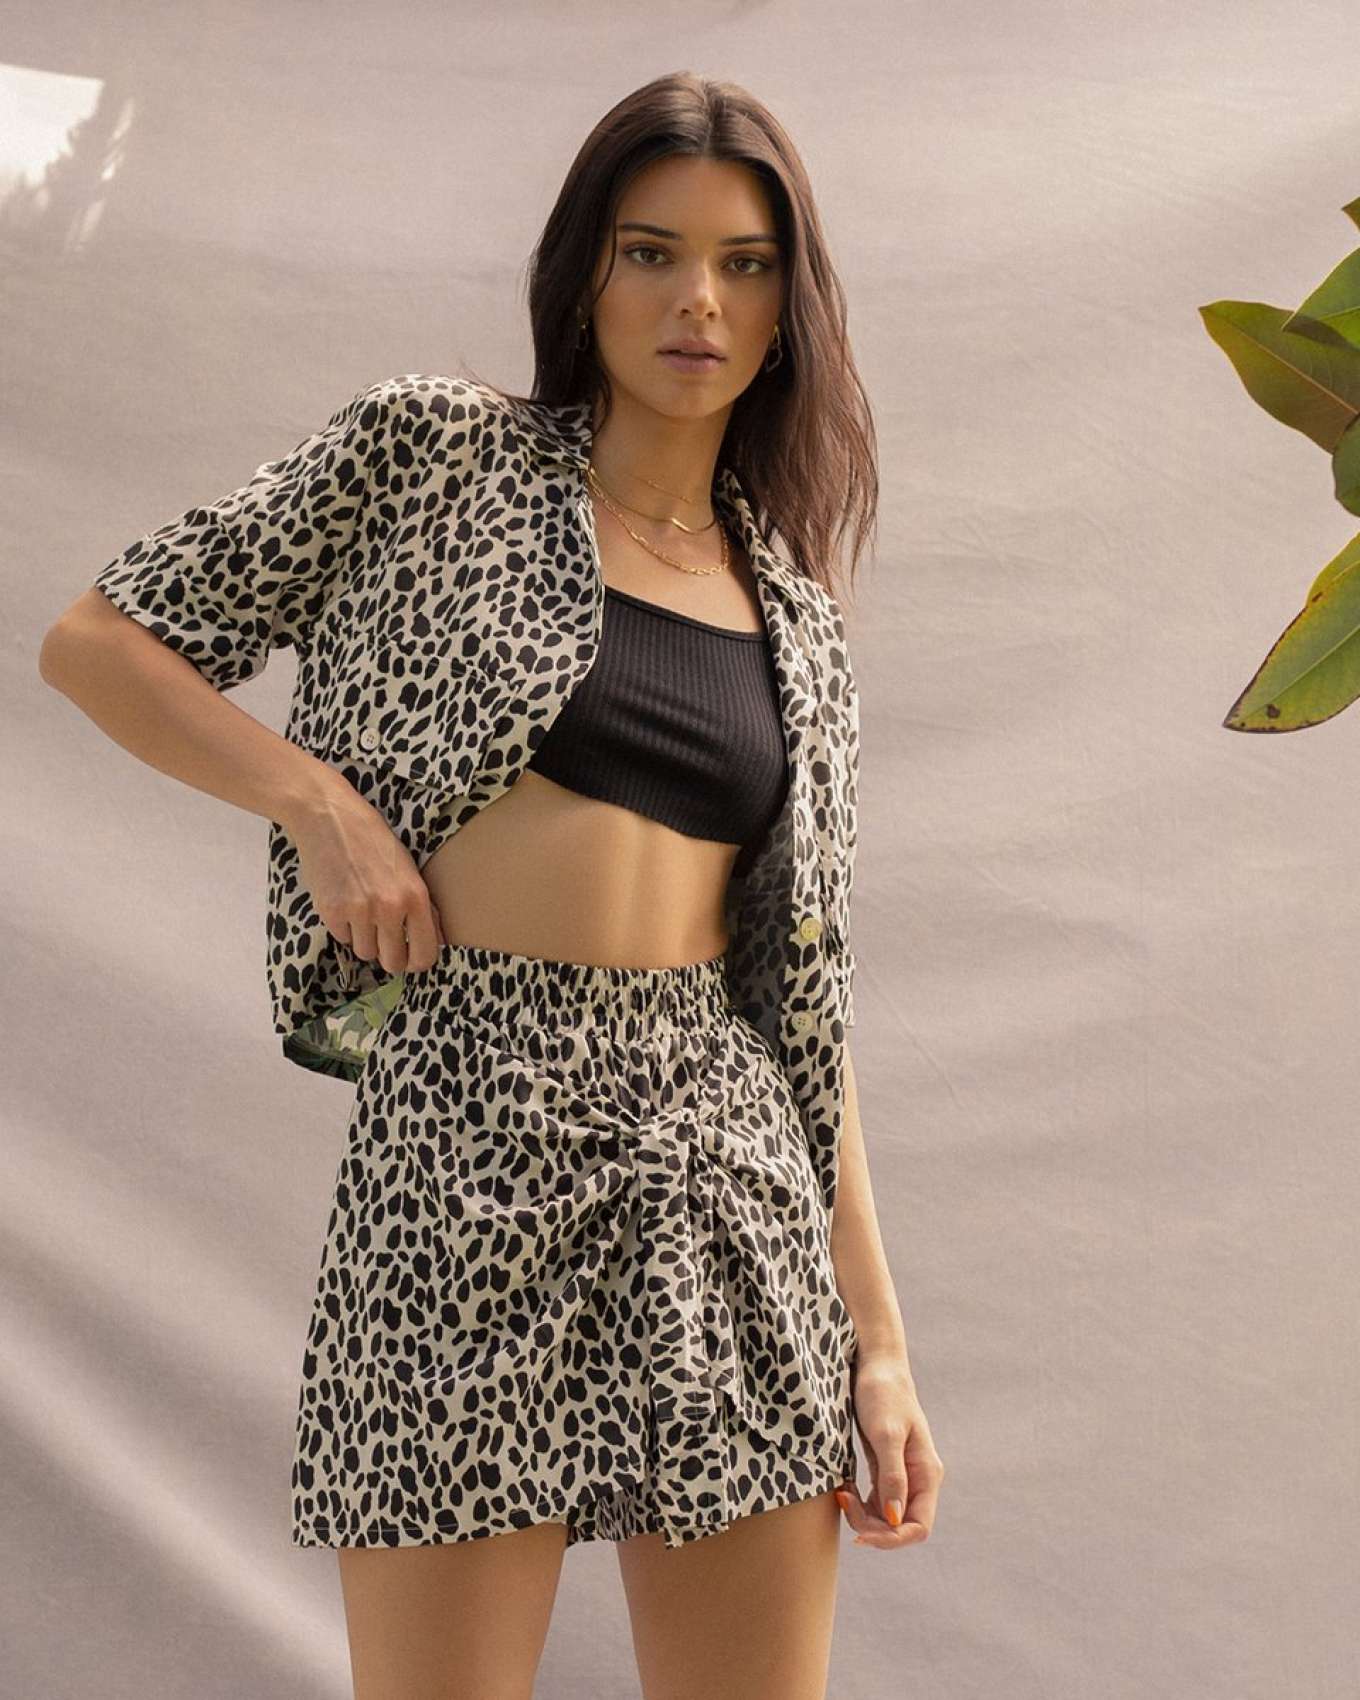 Kendall Jenner â€“ Kendall + Kylie Summer Collection 2019